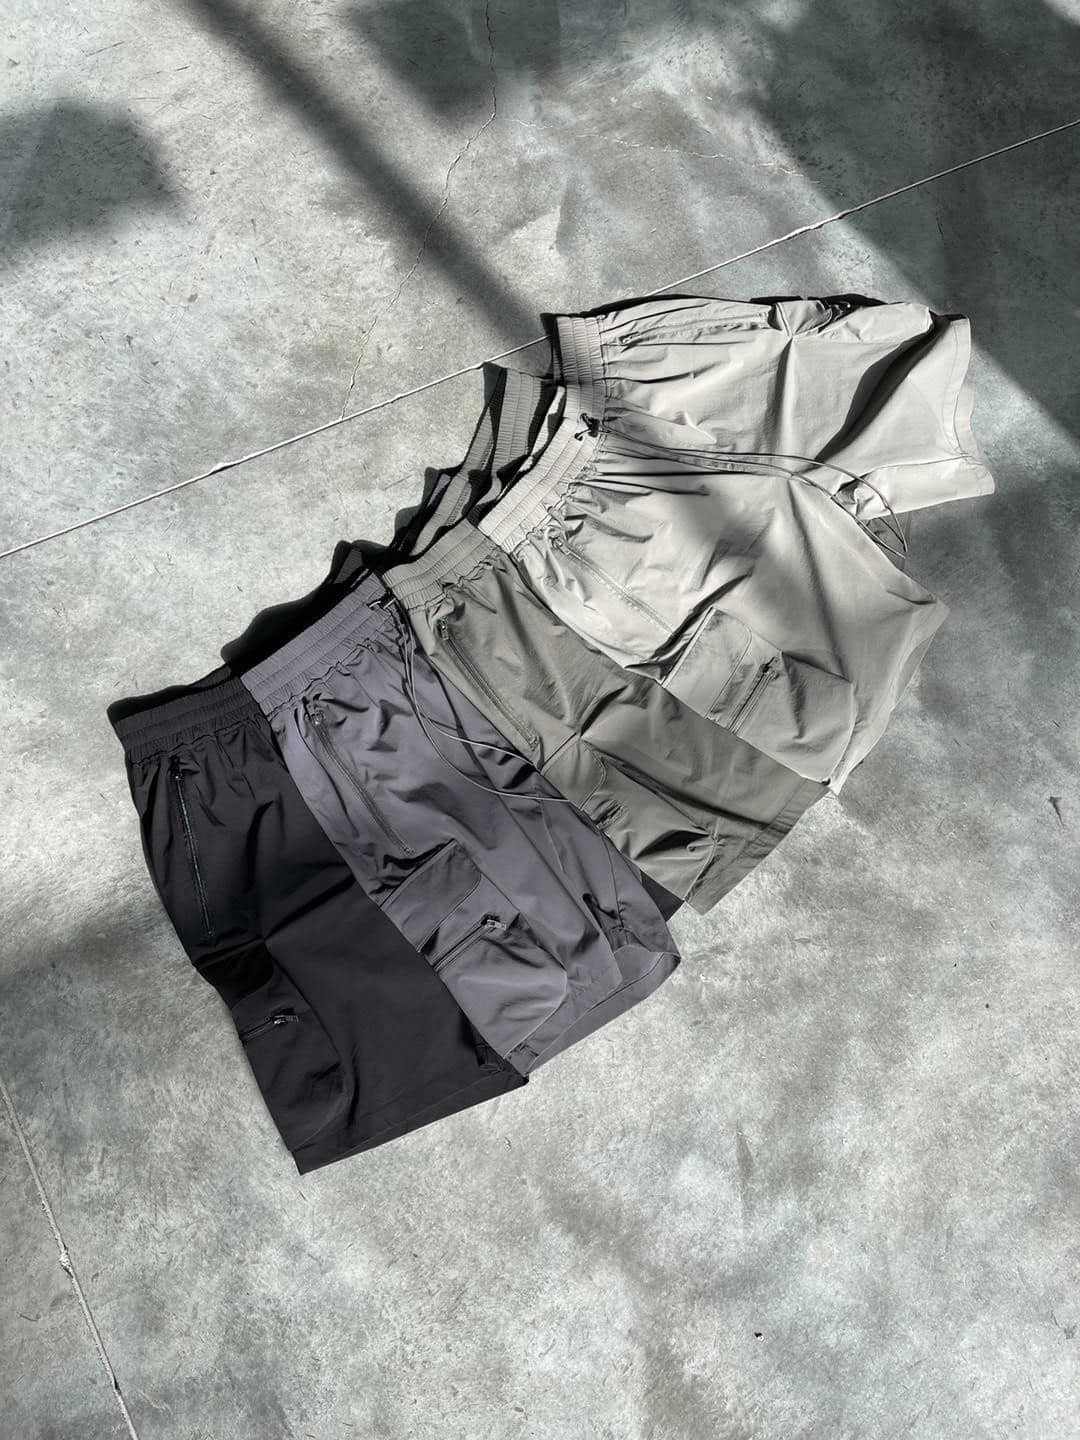 NEW Represent Shorts* REVIEW! ALL COLORS 9$ each 🤑 (Size M) : r